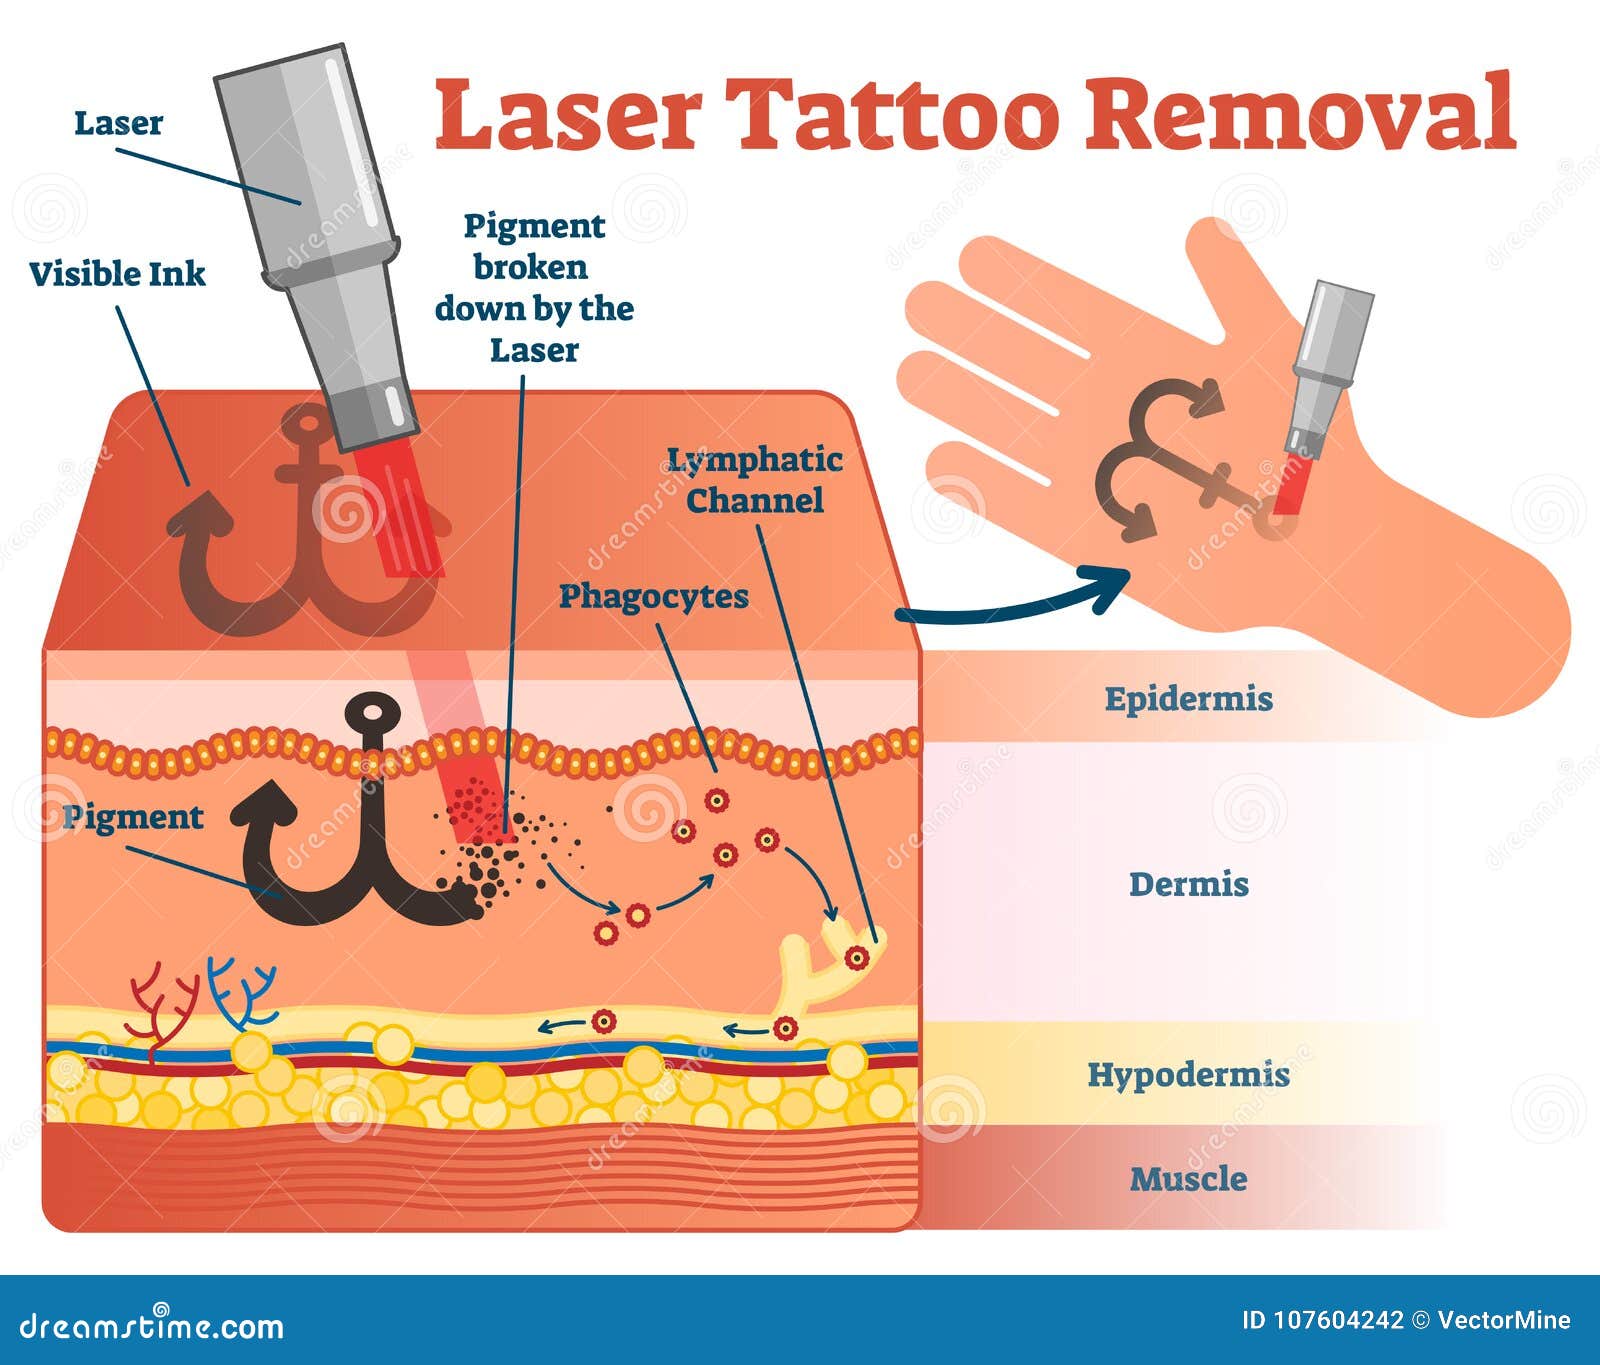 How Much Do Tattoos Actually Hurt? We Asked a Dermatologist